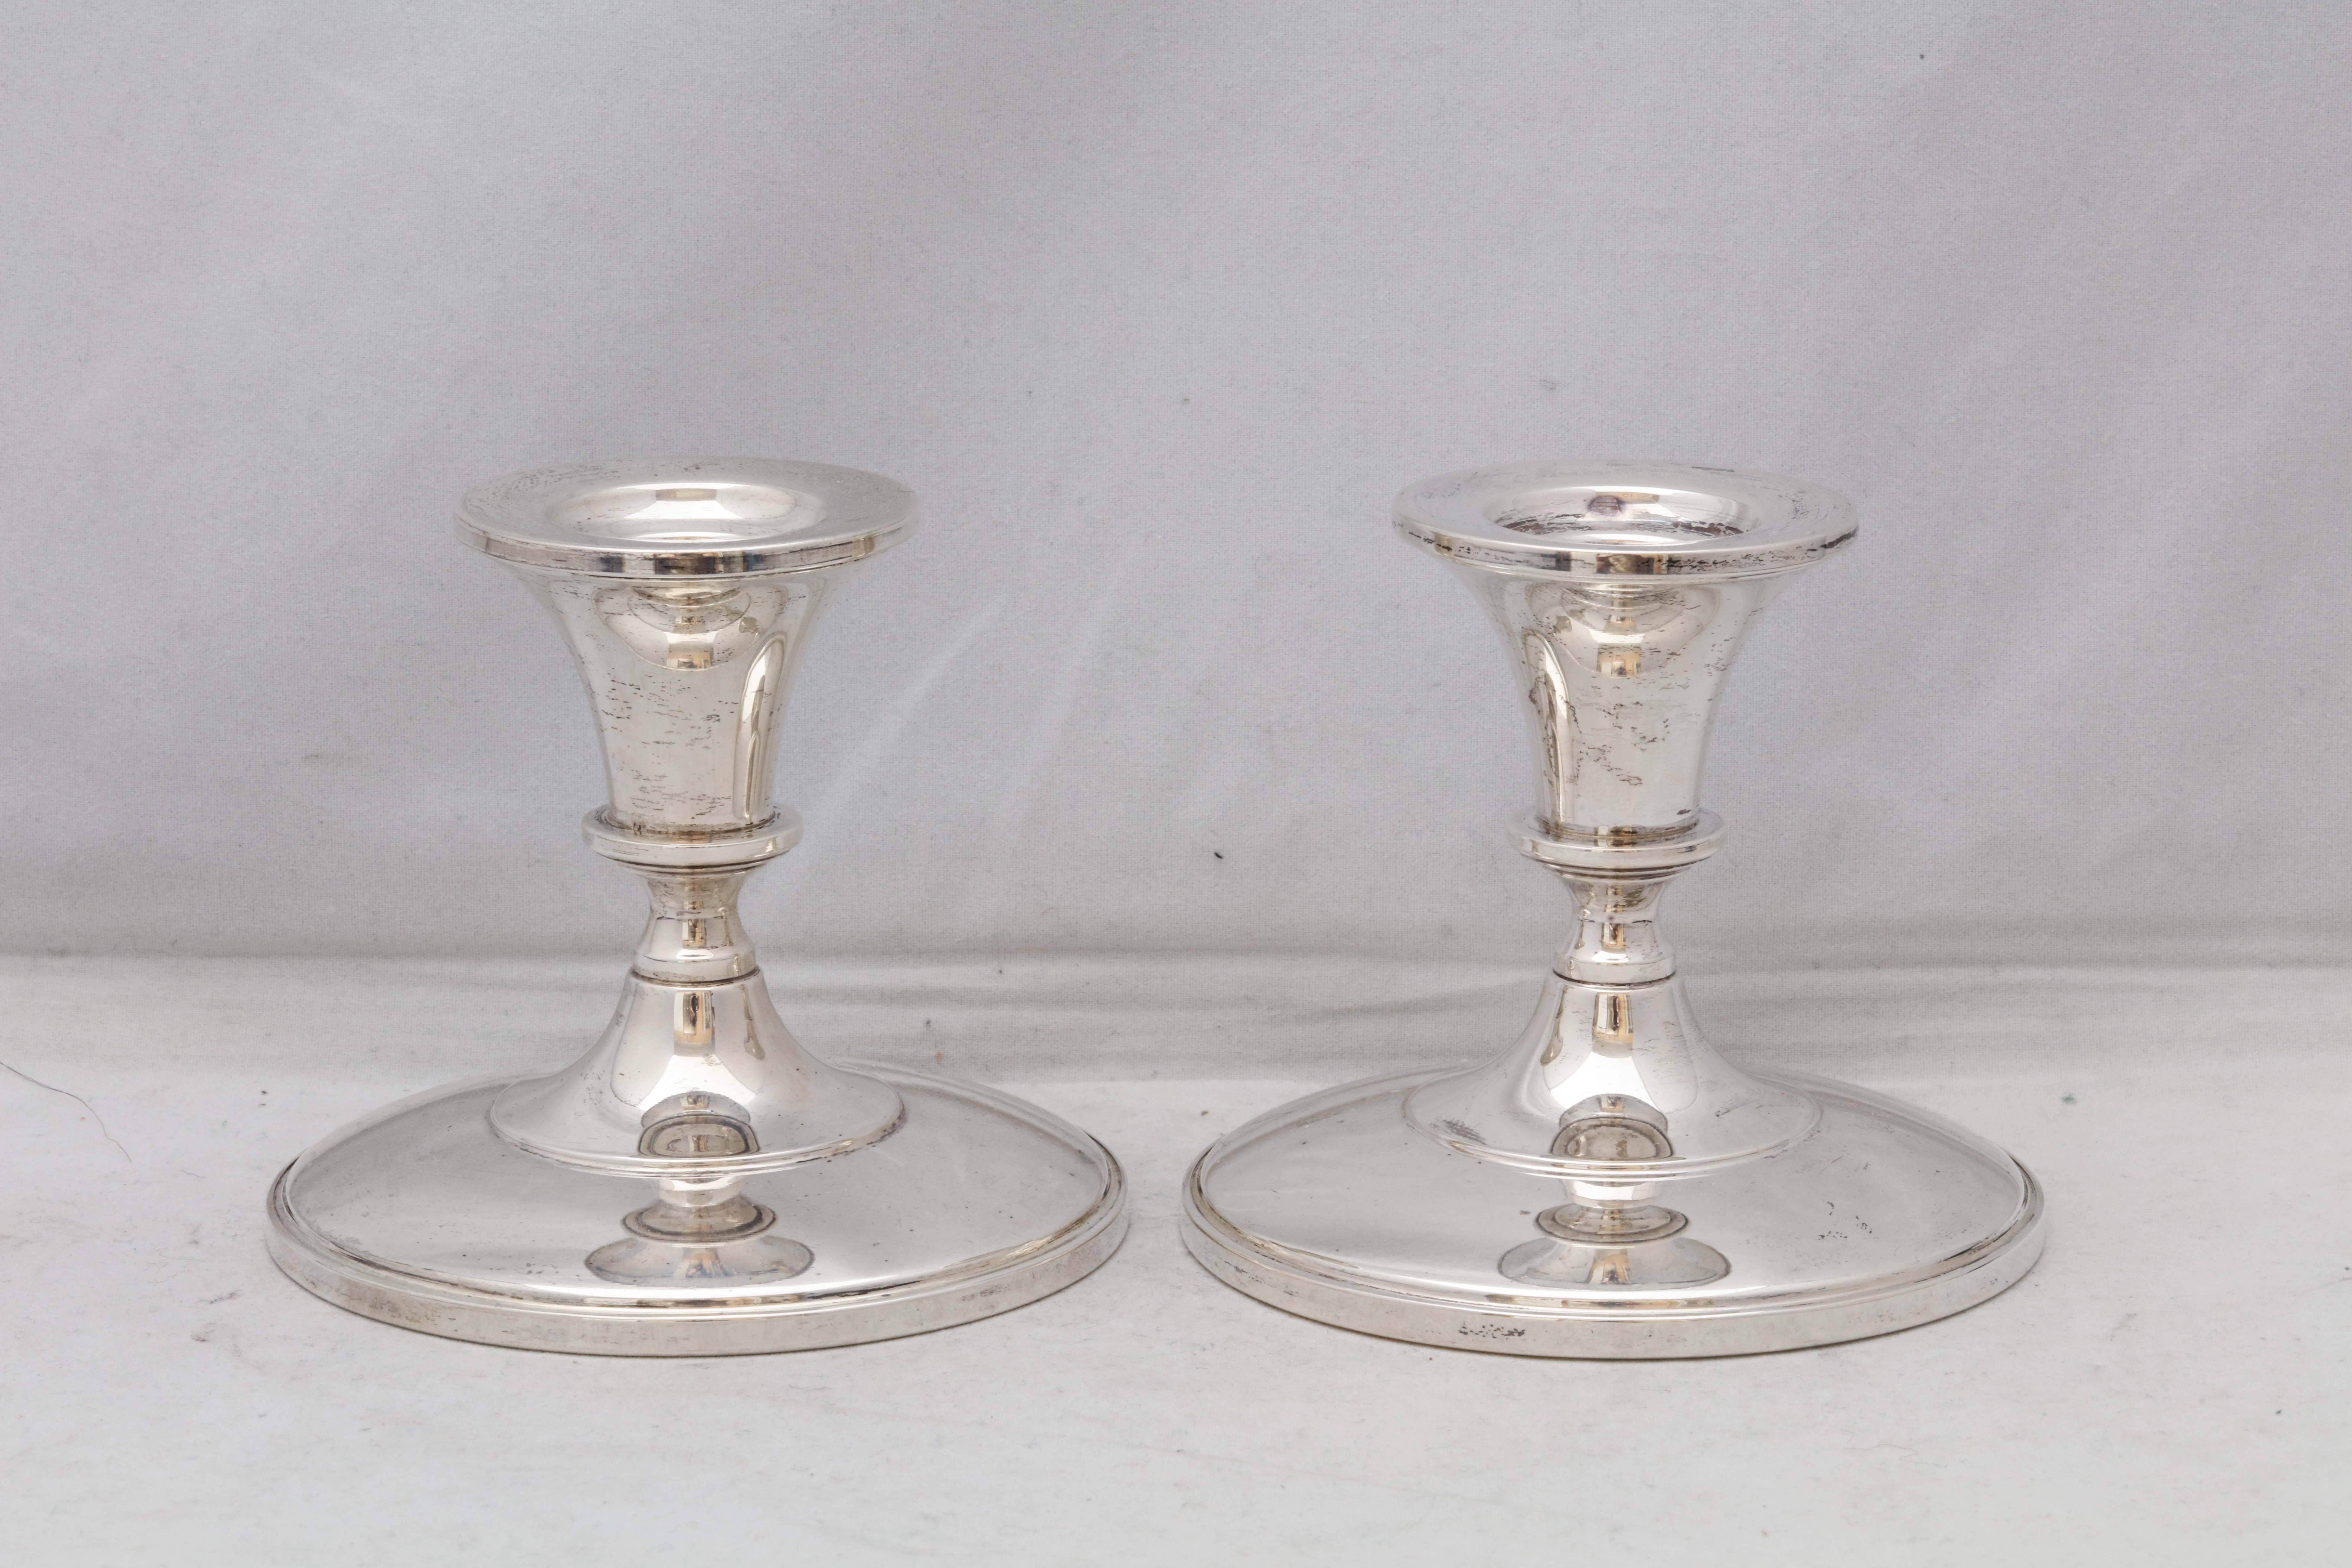 Pair of sterling silver, Empire style candlesticks, Fisher Silversmiths, Inc.n New Jersey, circa 1940s. 4